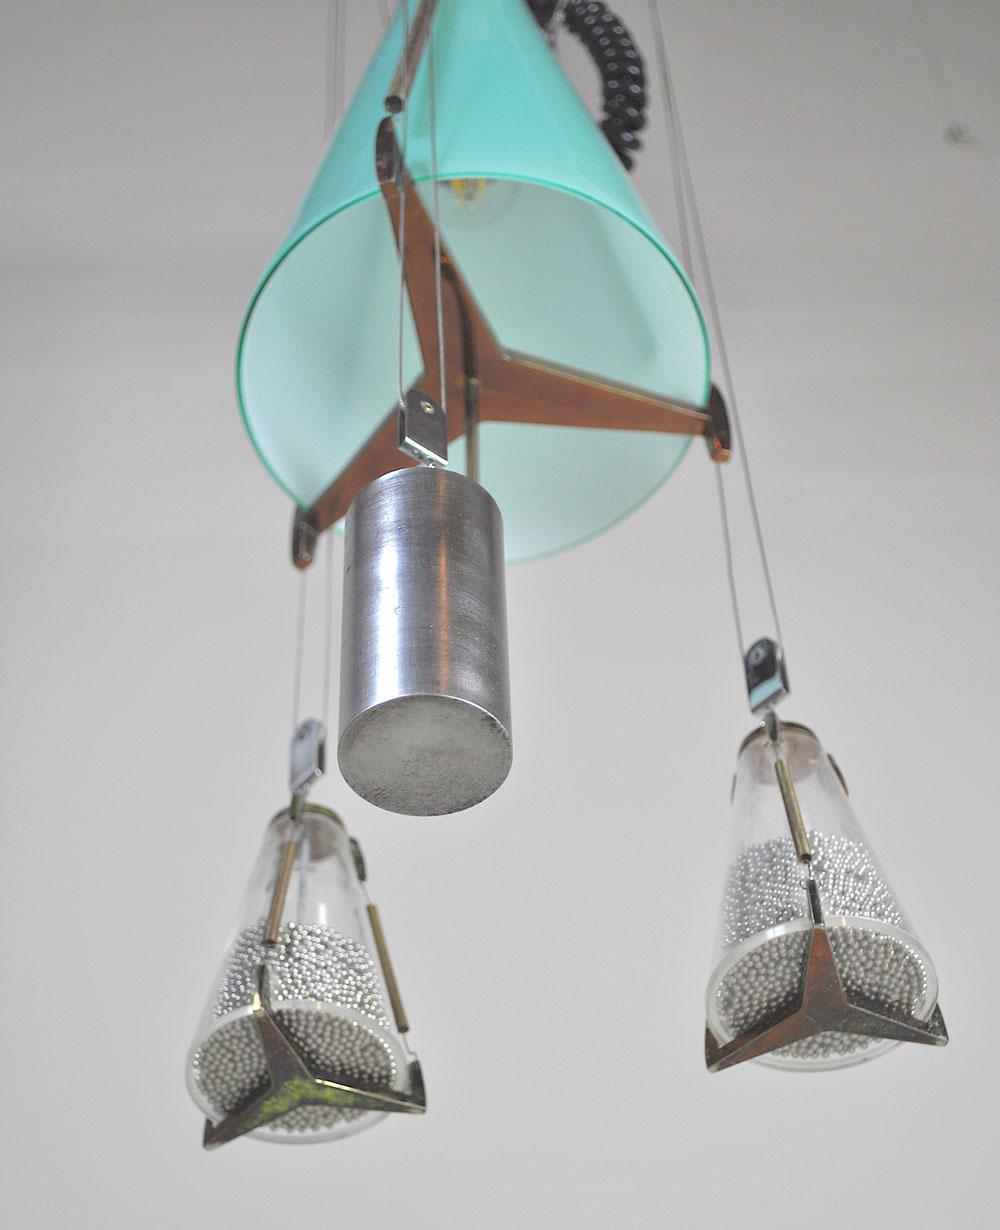 Italian Midcentury Chandelier in the Atomic Style from the 1950s For Sale 6